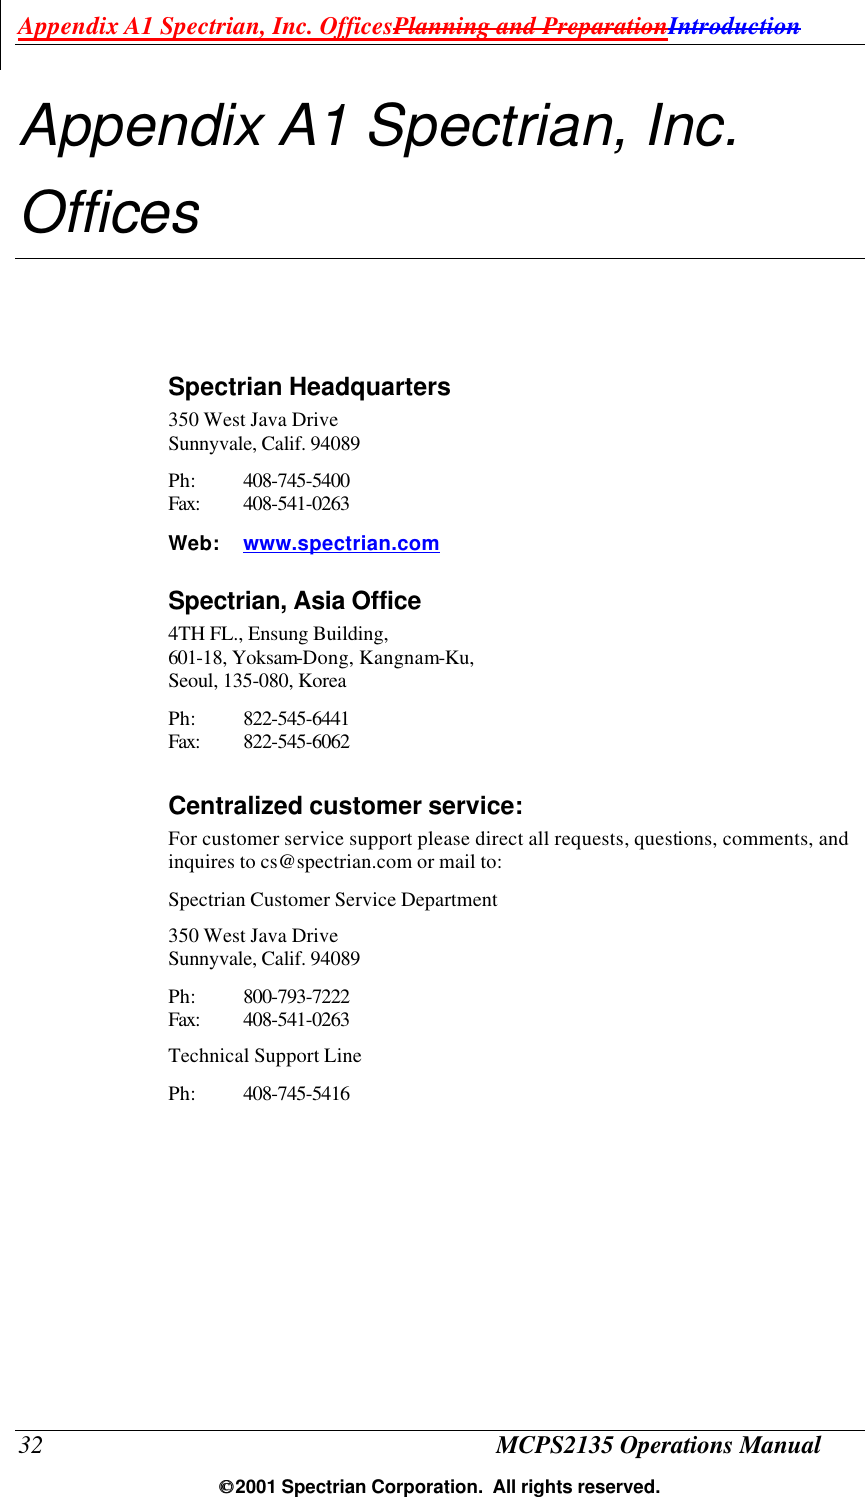 Appendix A1 Spectrian, Inc. OfficesPlanning and PreparationIntroduction 32 MCPS2135 Operations Manual  2001 Spectrian Corporation.  All rights reserved. Appendix A1 Spectrian, Inc. Offices Spectrian Headquarters 350 West Java Drive Sunnyvale, Calif. 94089 Ph: 408-745-5400 Fax: 408-541-0263 Web: www.spectrian.com Spectrian, Asia Office 4TH FL., Ensung Building,  601-18, Yoksam-Dong, Kangnam-Ku,  Seoul, 135-080, Korea  Ph: 822-545-6441 Fax: 822-545-6062  Centralized customer service: For customer service support please direct all requests, questions, comments, and inquires to cs@spectrian.com or mail to: Spectrian Customer Service Department 350 West Java Drive Sunnyvale, Calif. 94089 Ph: 800-793-7222 Fax: 408-541-0263  Technical Support Line Ph: 408-745-5416 